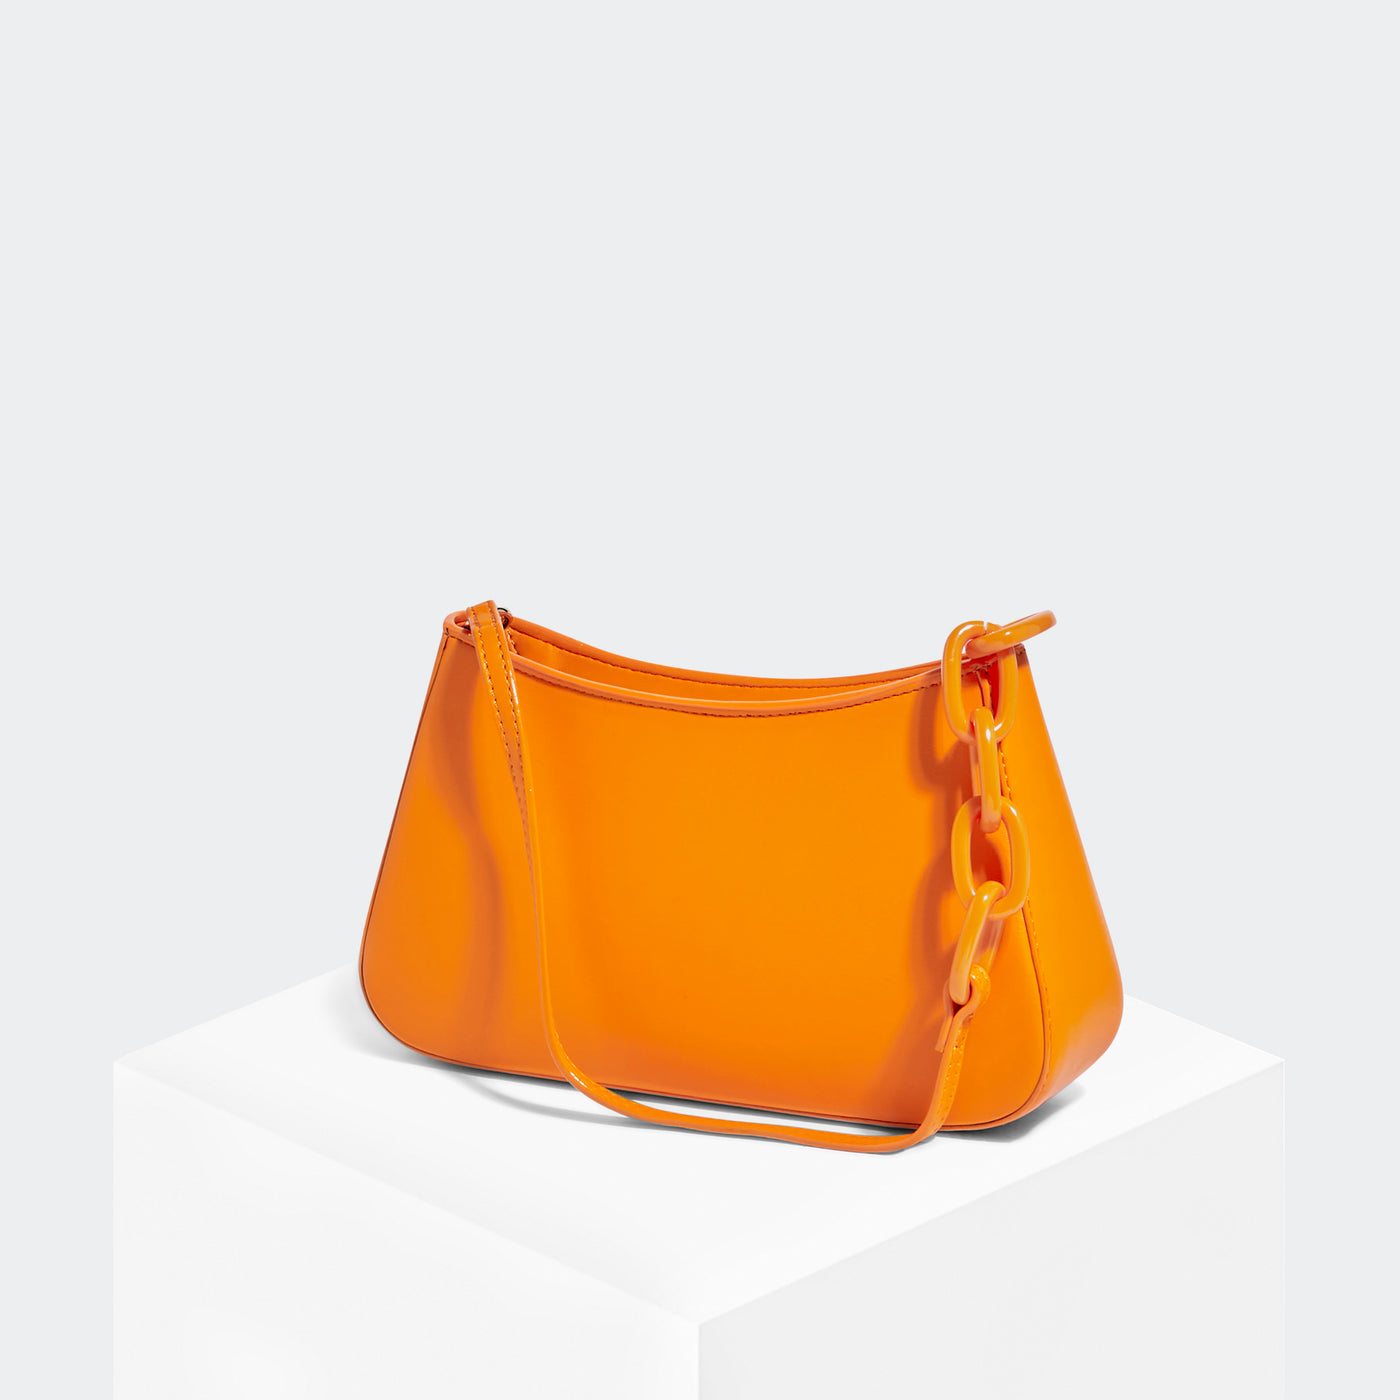 House Of Want | Newbie Baguette Orange – House of Want